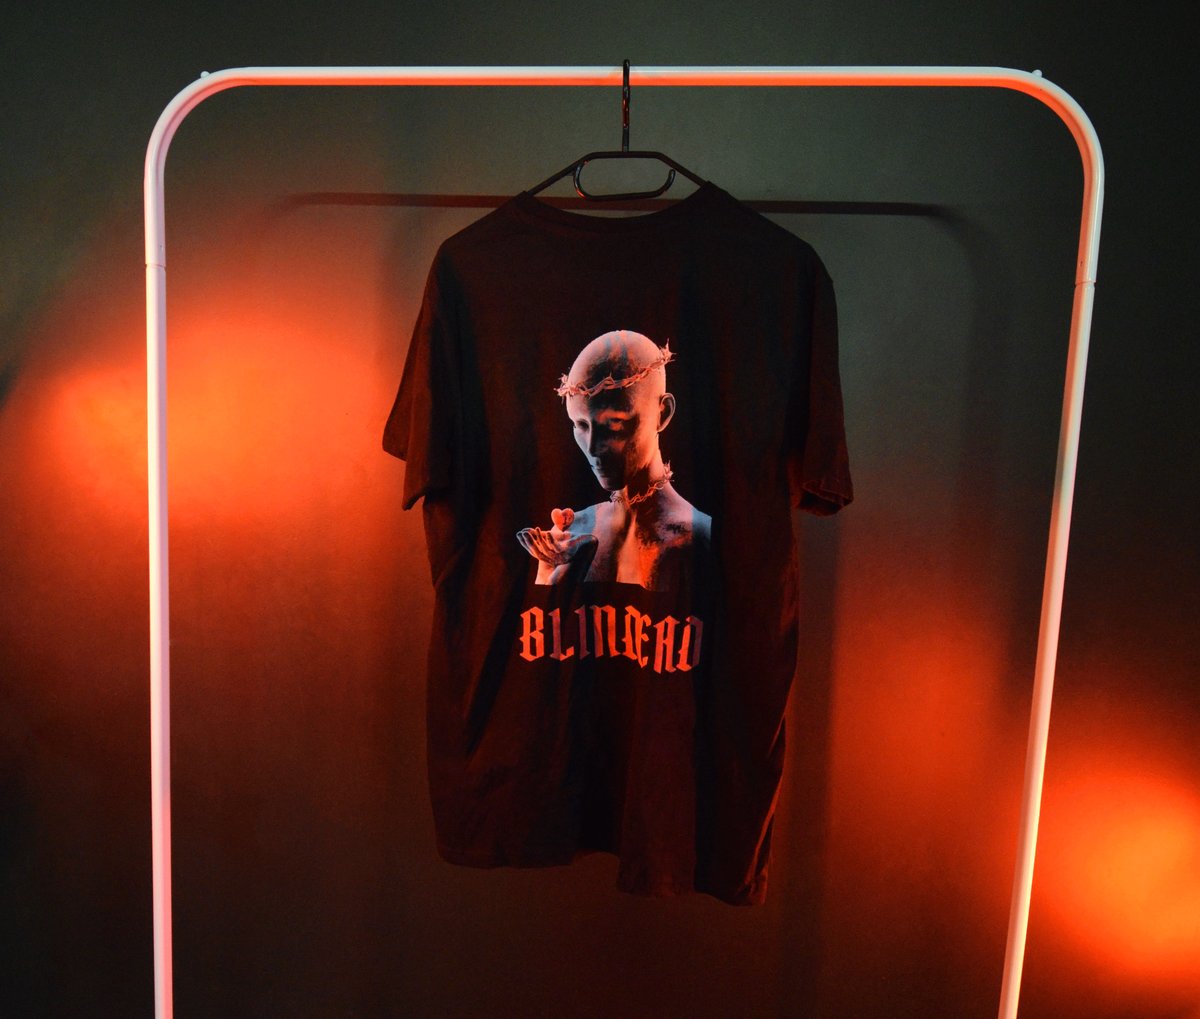 T-shirt "BLINDEAD" limited edition